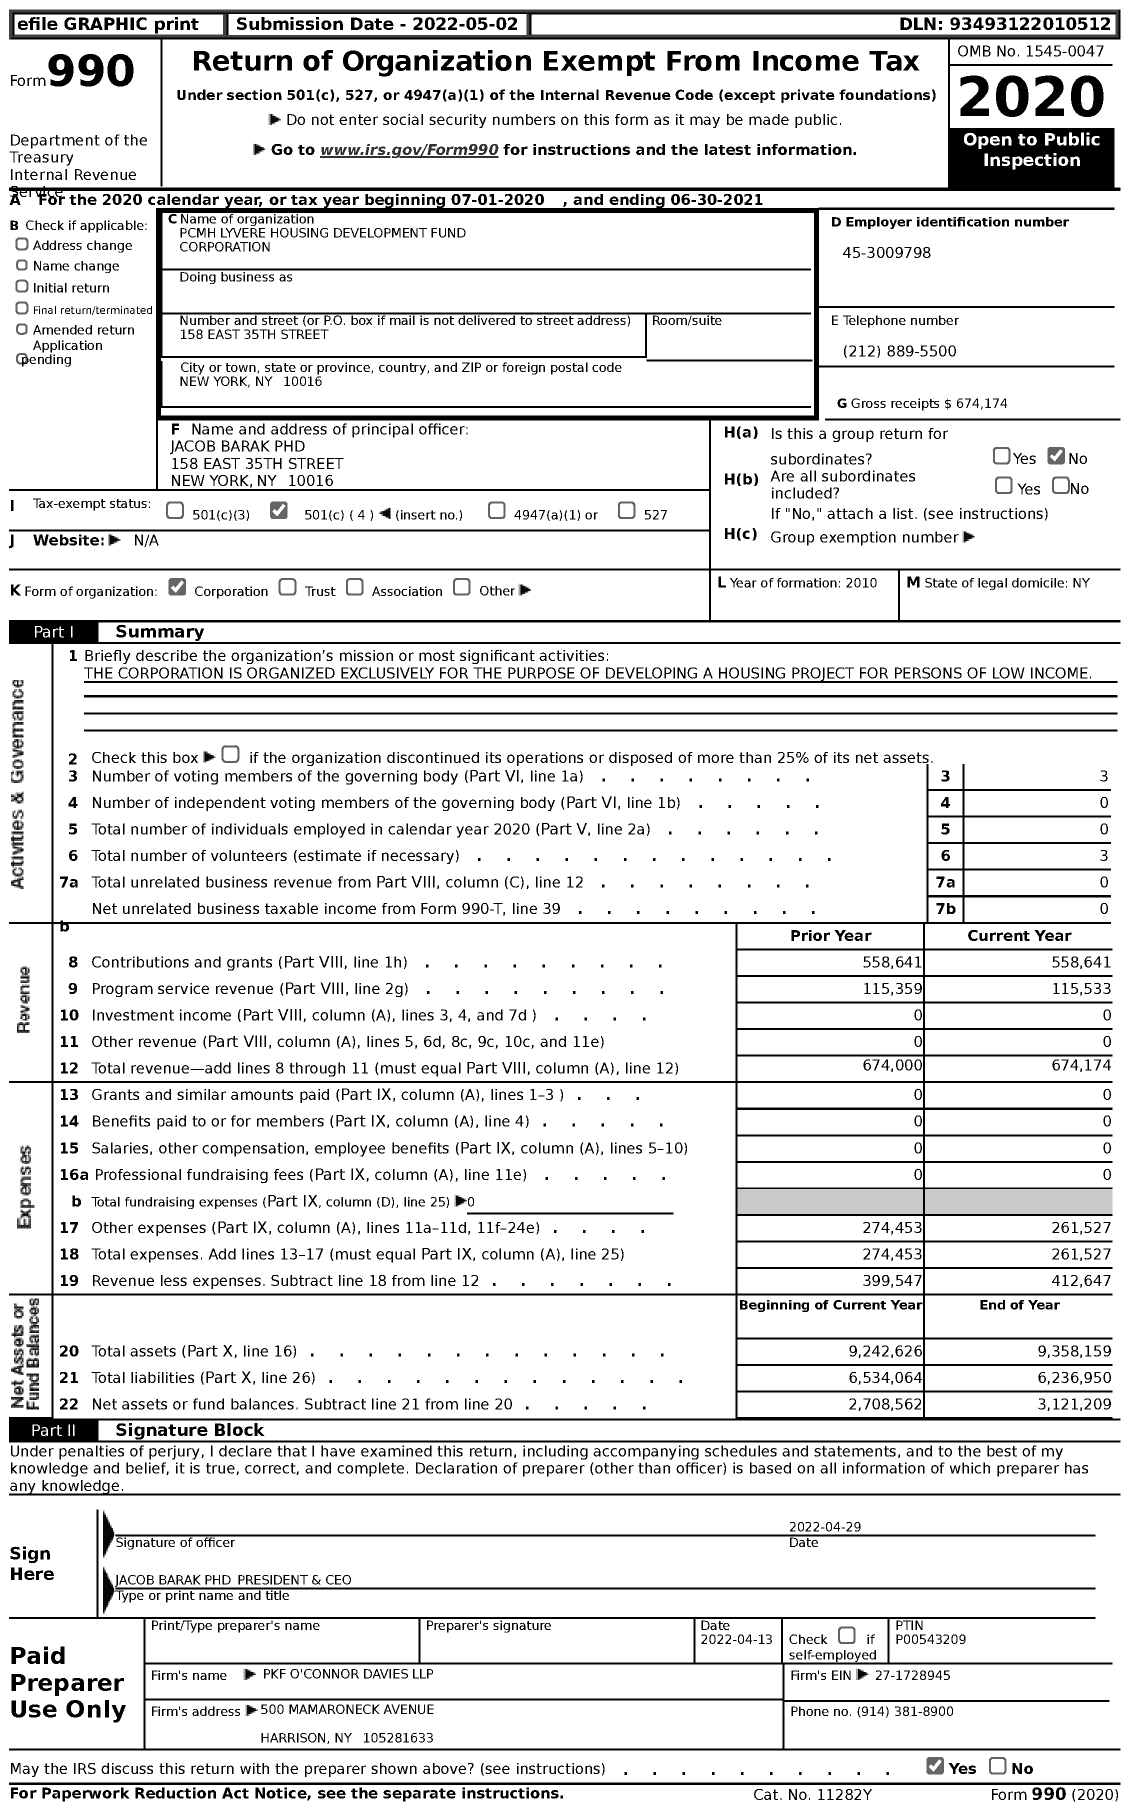 Image of first page of 2020 Form 990 for PCMH Lyvere Housing Development Fund Corporation